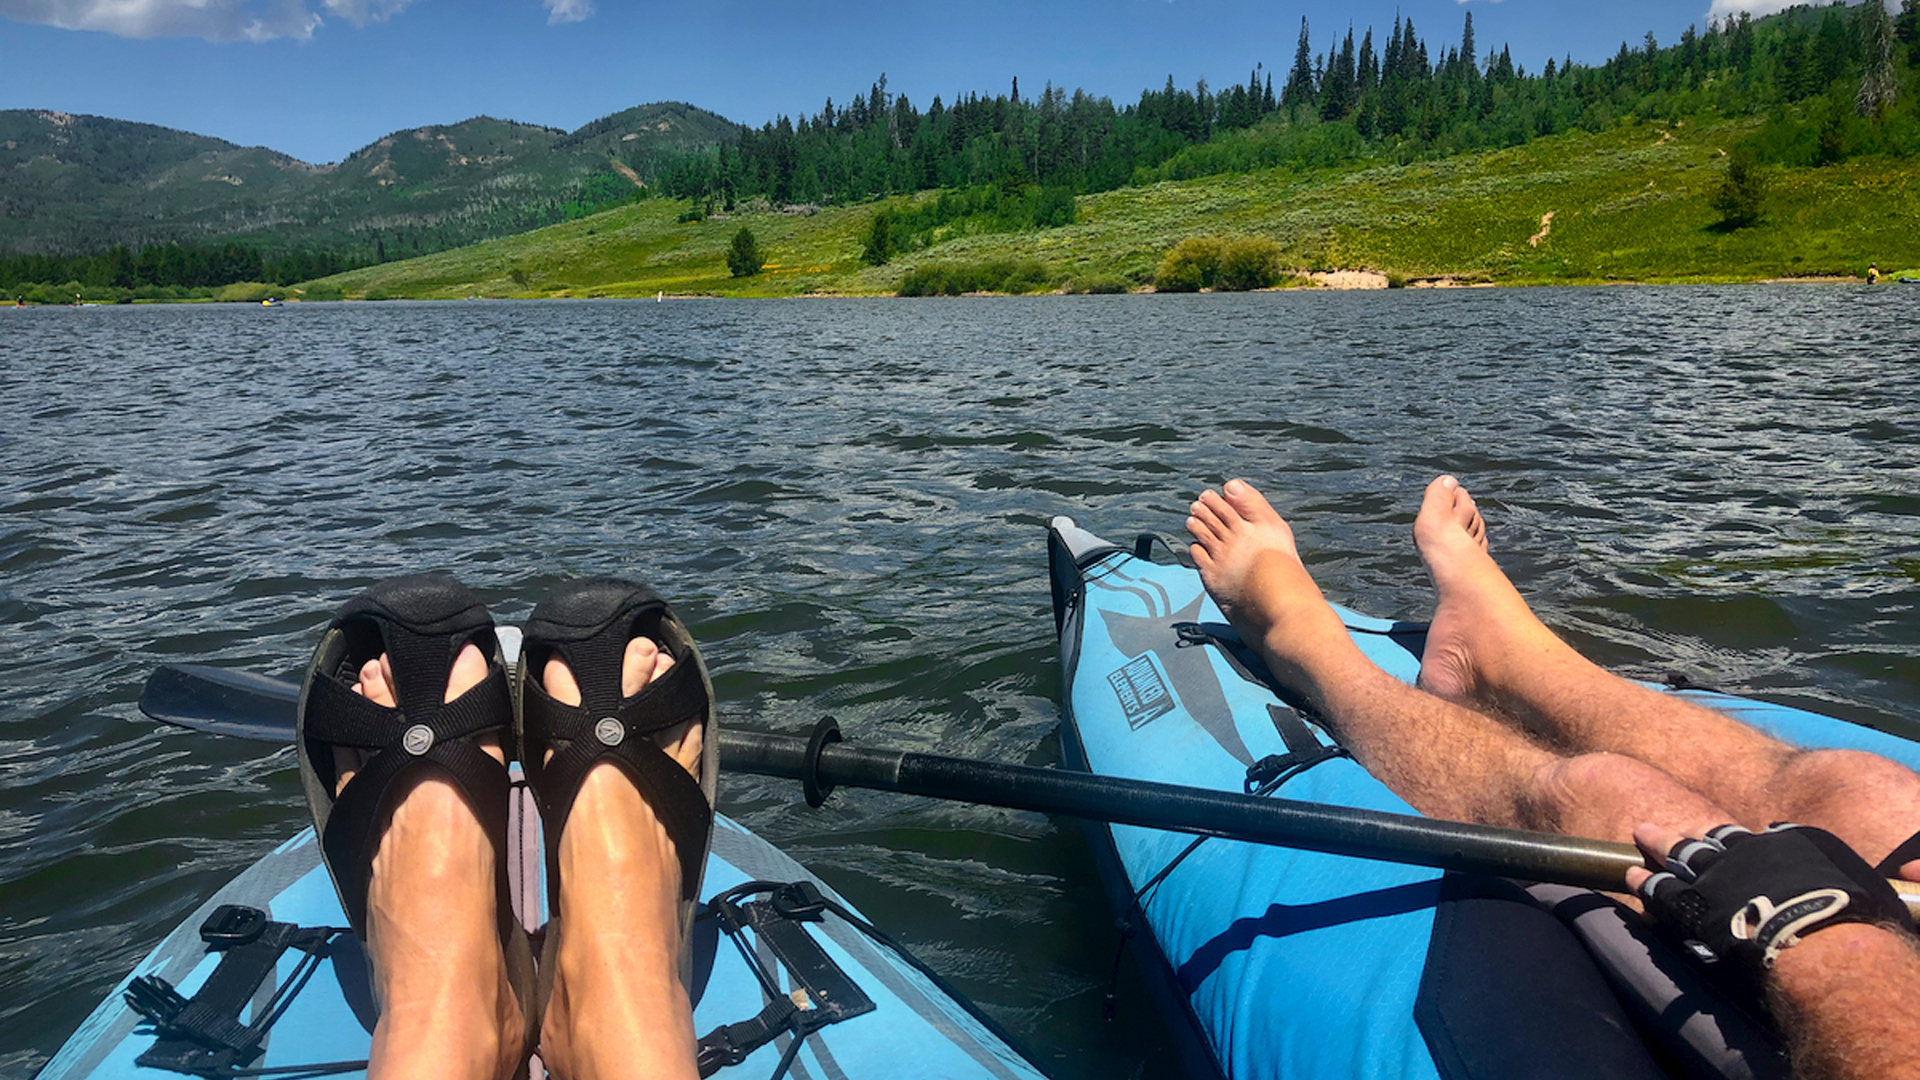 Jim and Carmen kayak while living full-time in their Airstream travel trailer.